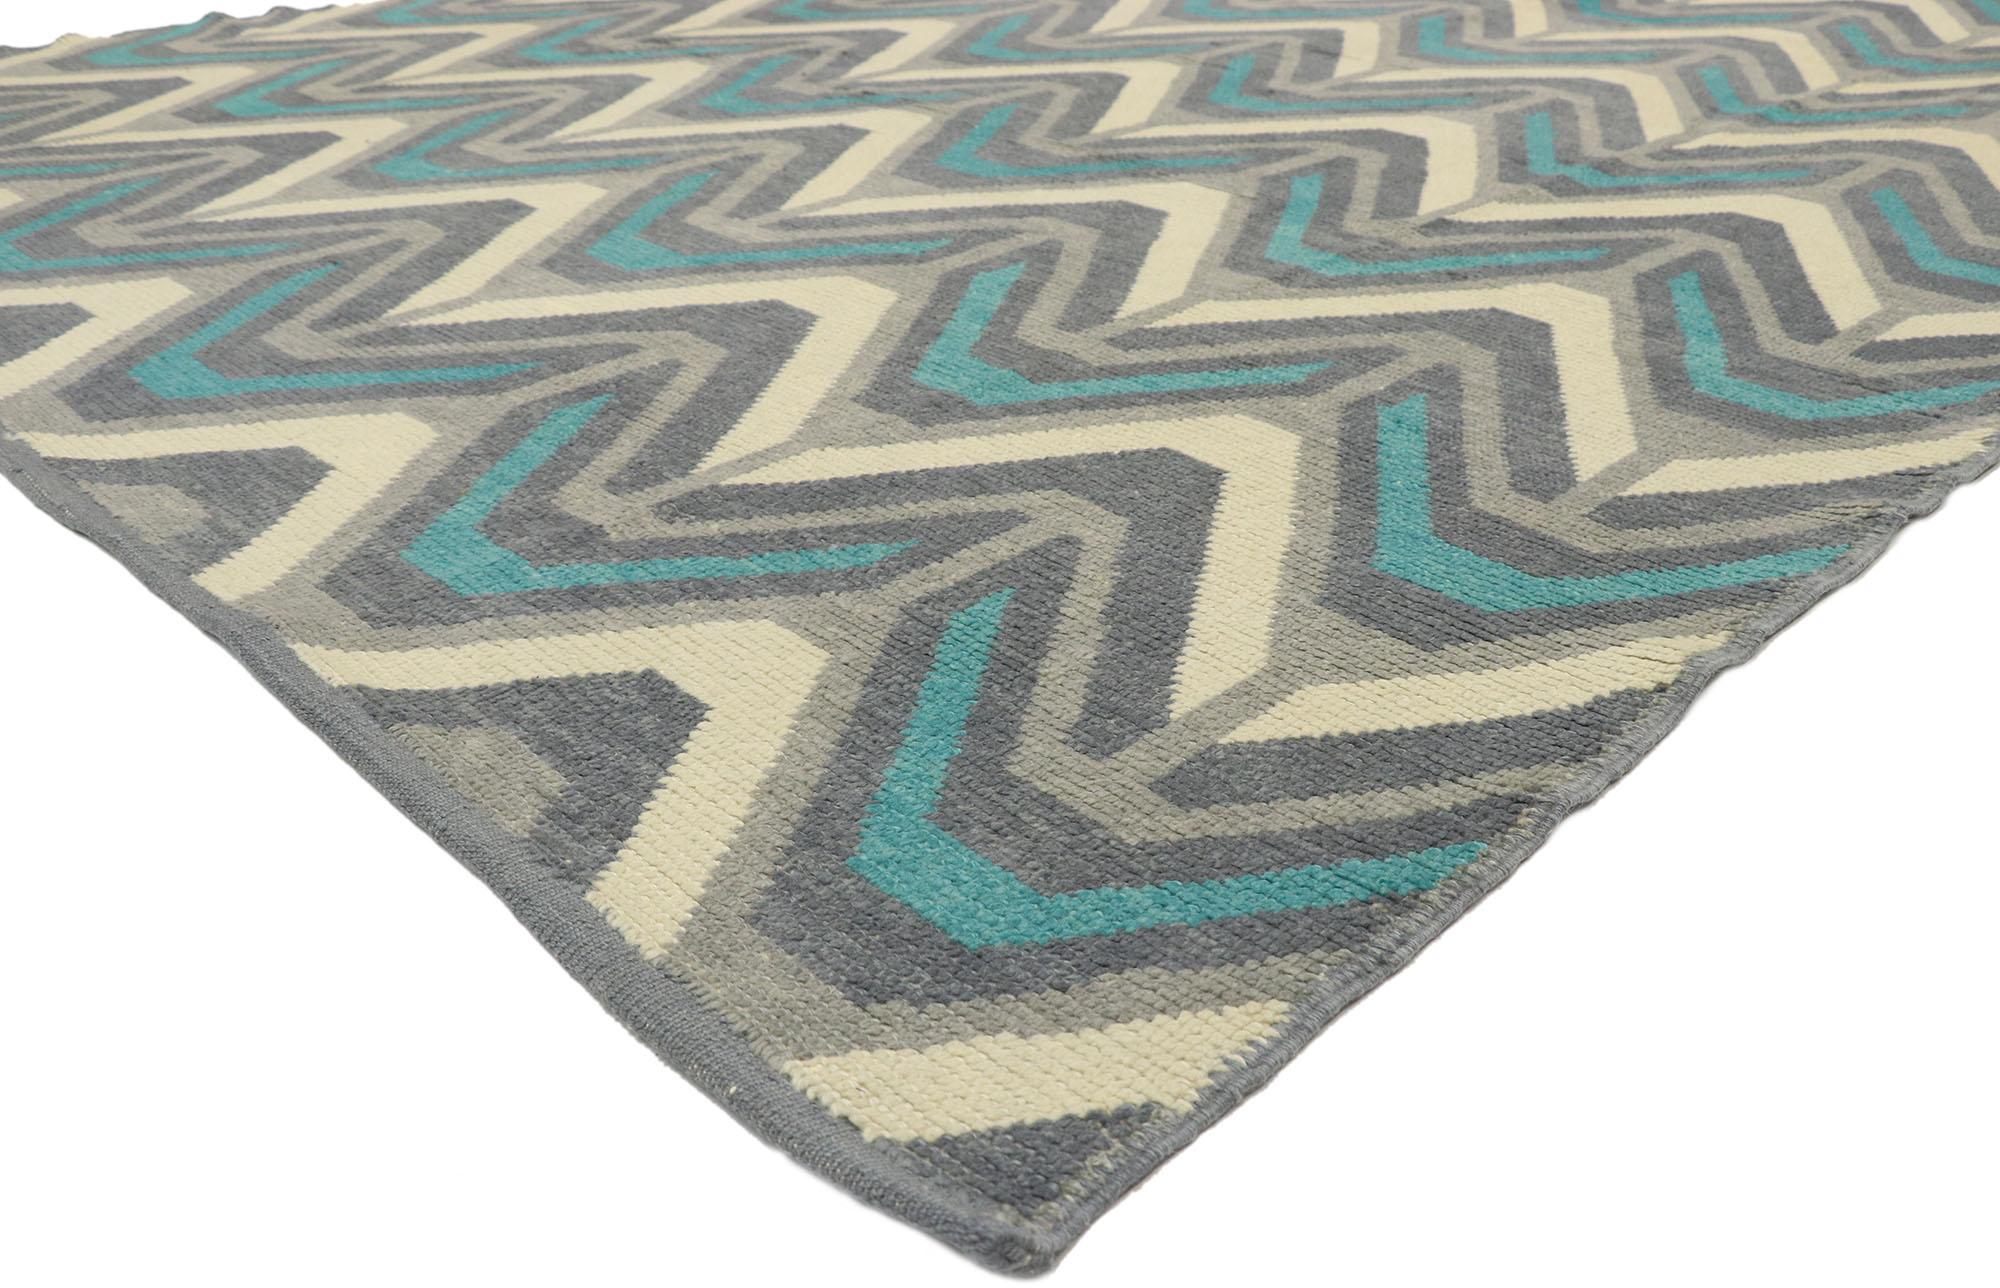 52993 New Modern Chevron Moroccan Rug, 08’10 x 12'07.
Emanating modern style with incredible detail and texture, this hand knotted wool Turkish Moroccan style rug is a captivating vision of woven beauty. The abstract chevron design and energetic